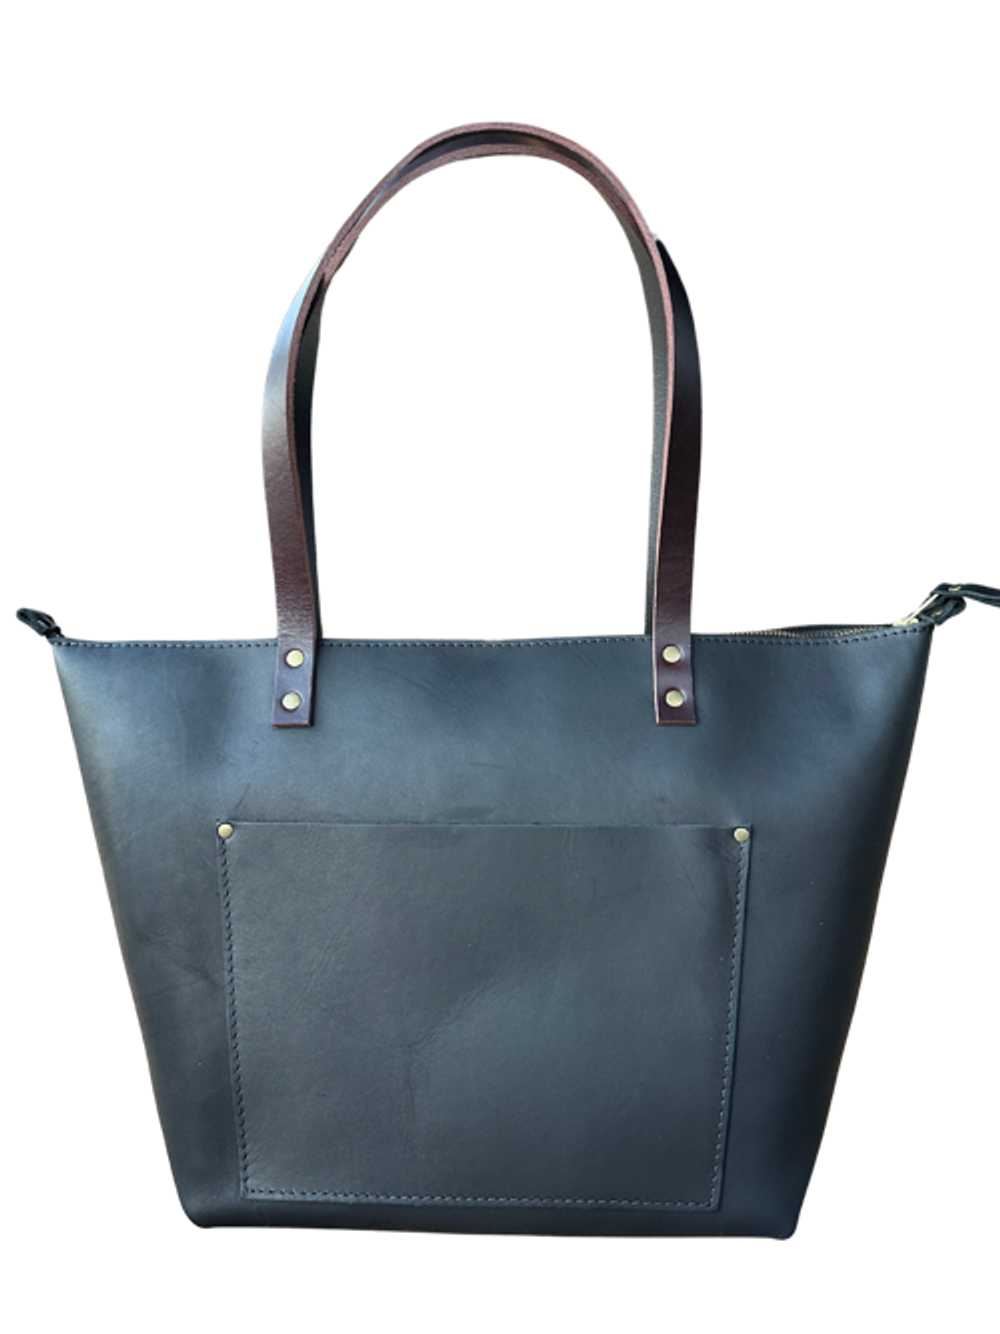 Portland Leather 'Almost Perfect' Zipper Tote - image 3